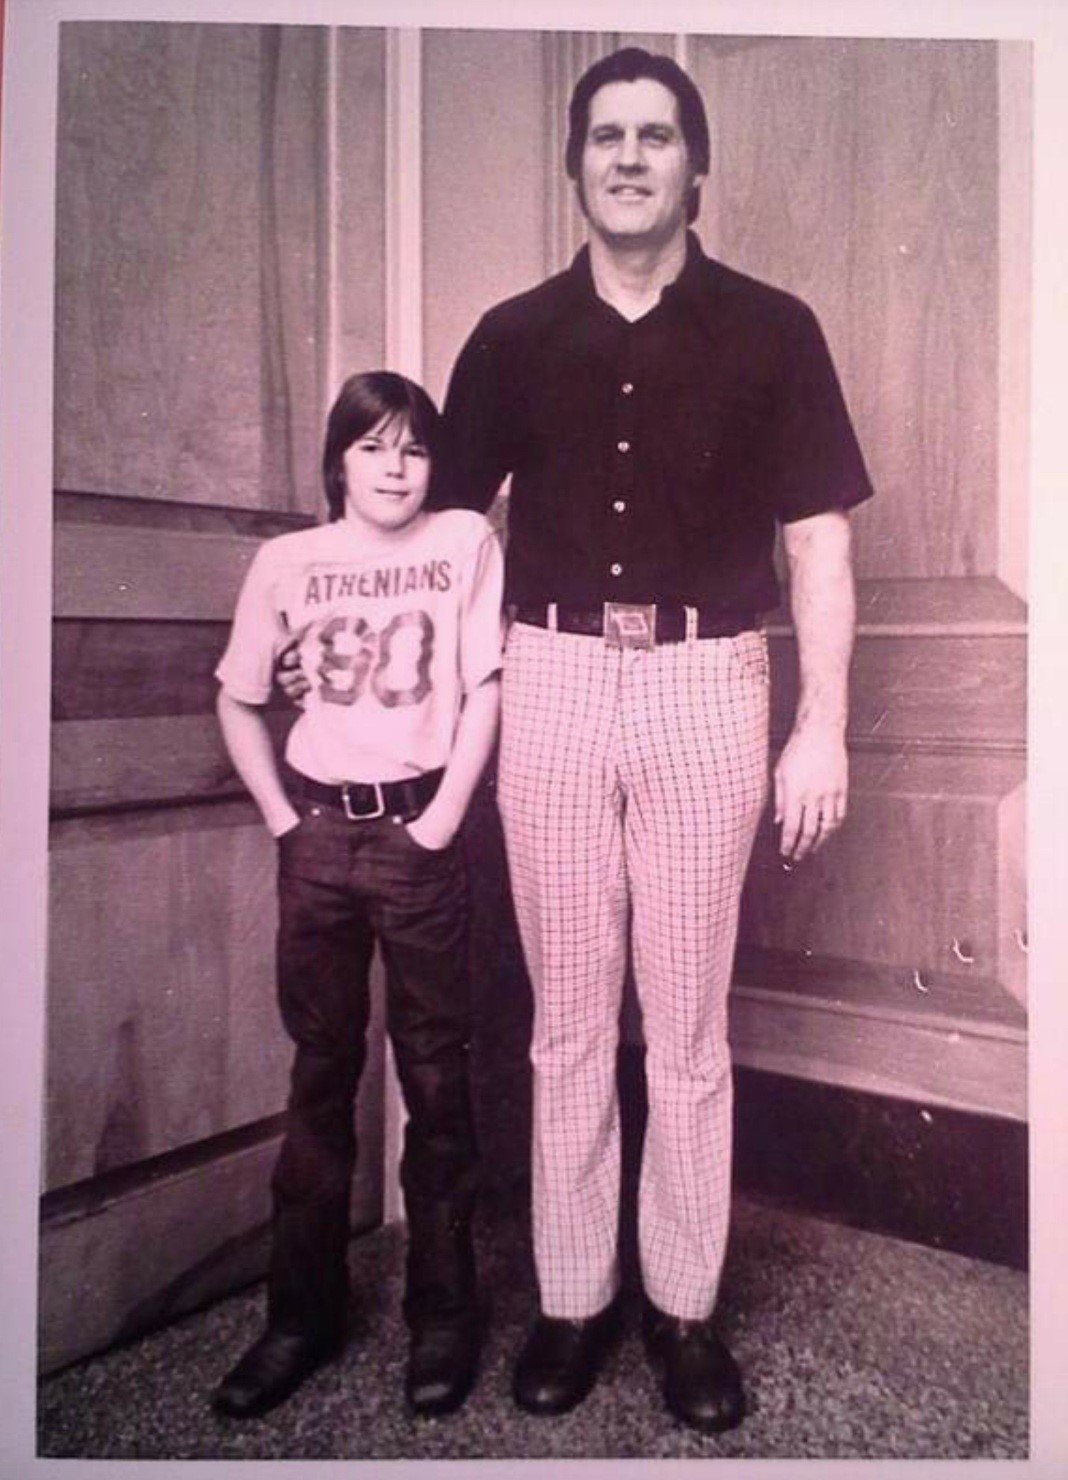 Tim ’87 and Max ’58 Servies in 1976. Both were star student-athletes, campus leaders, and named into the Wabash College Athletic Hall of Fame. 